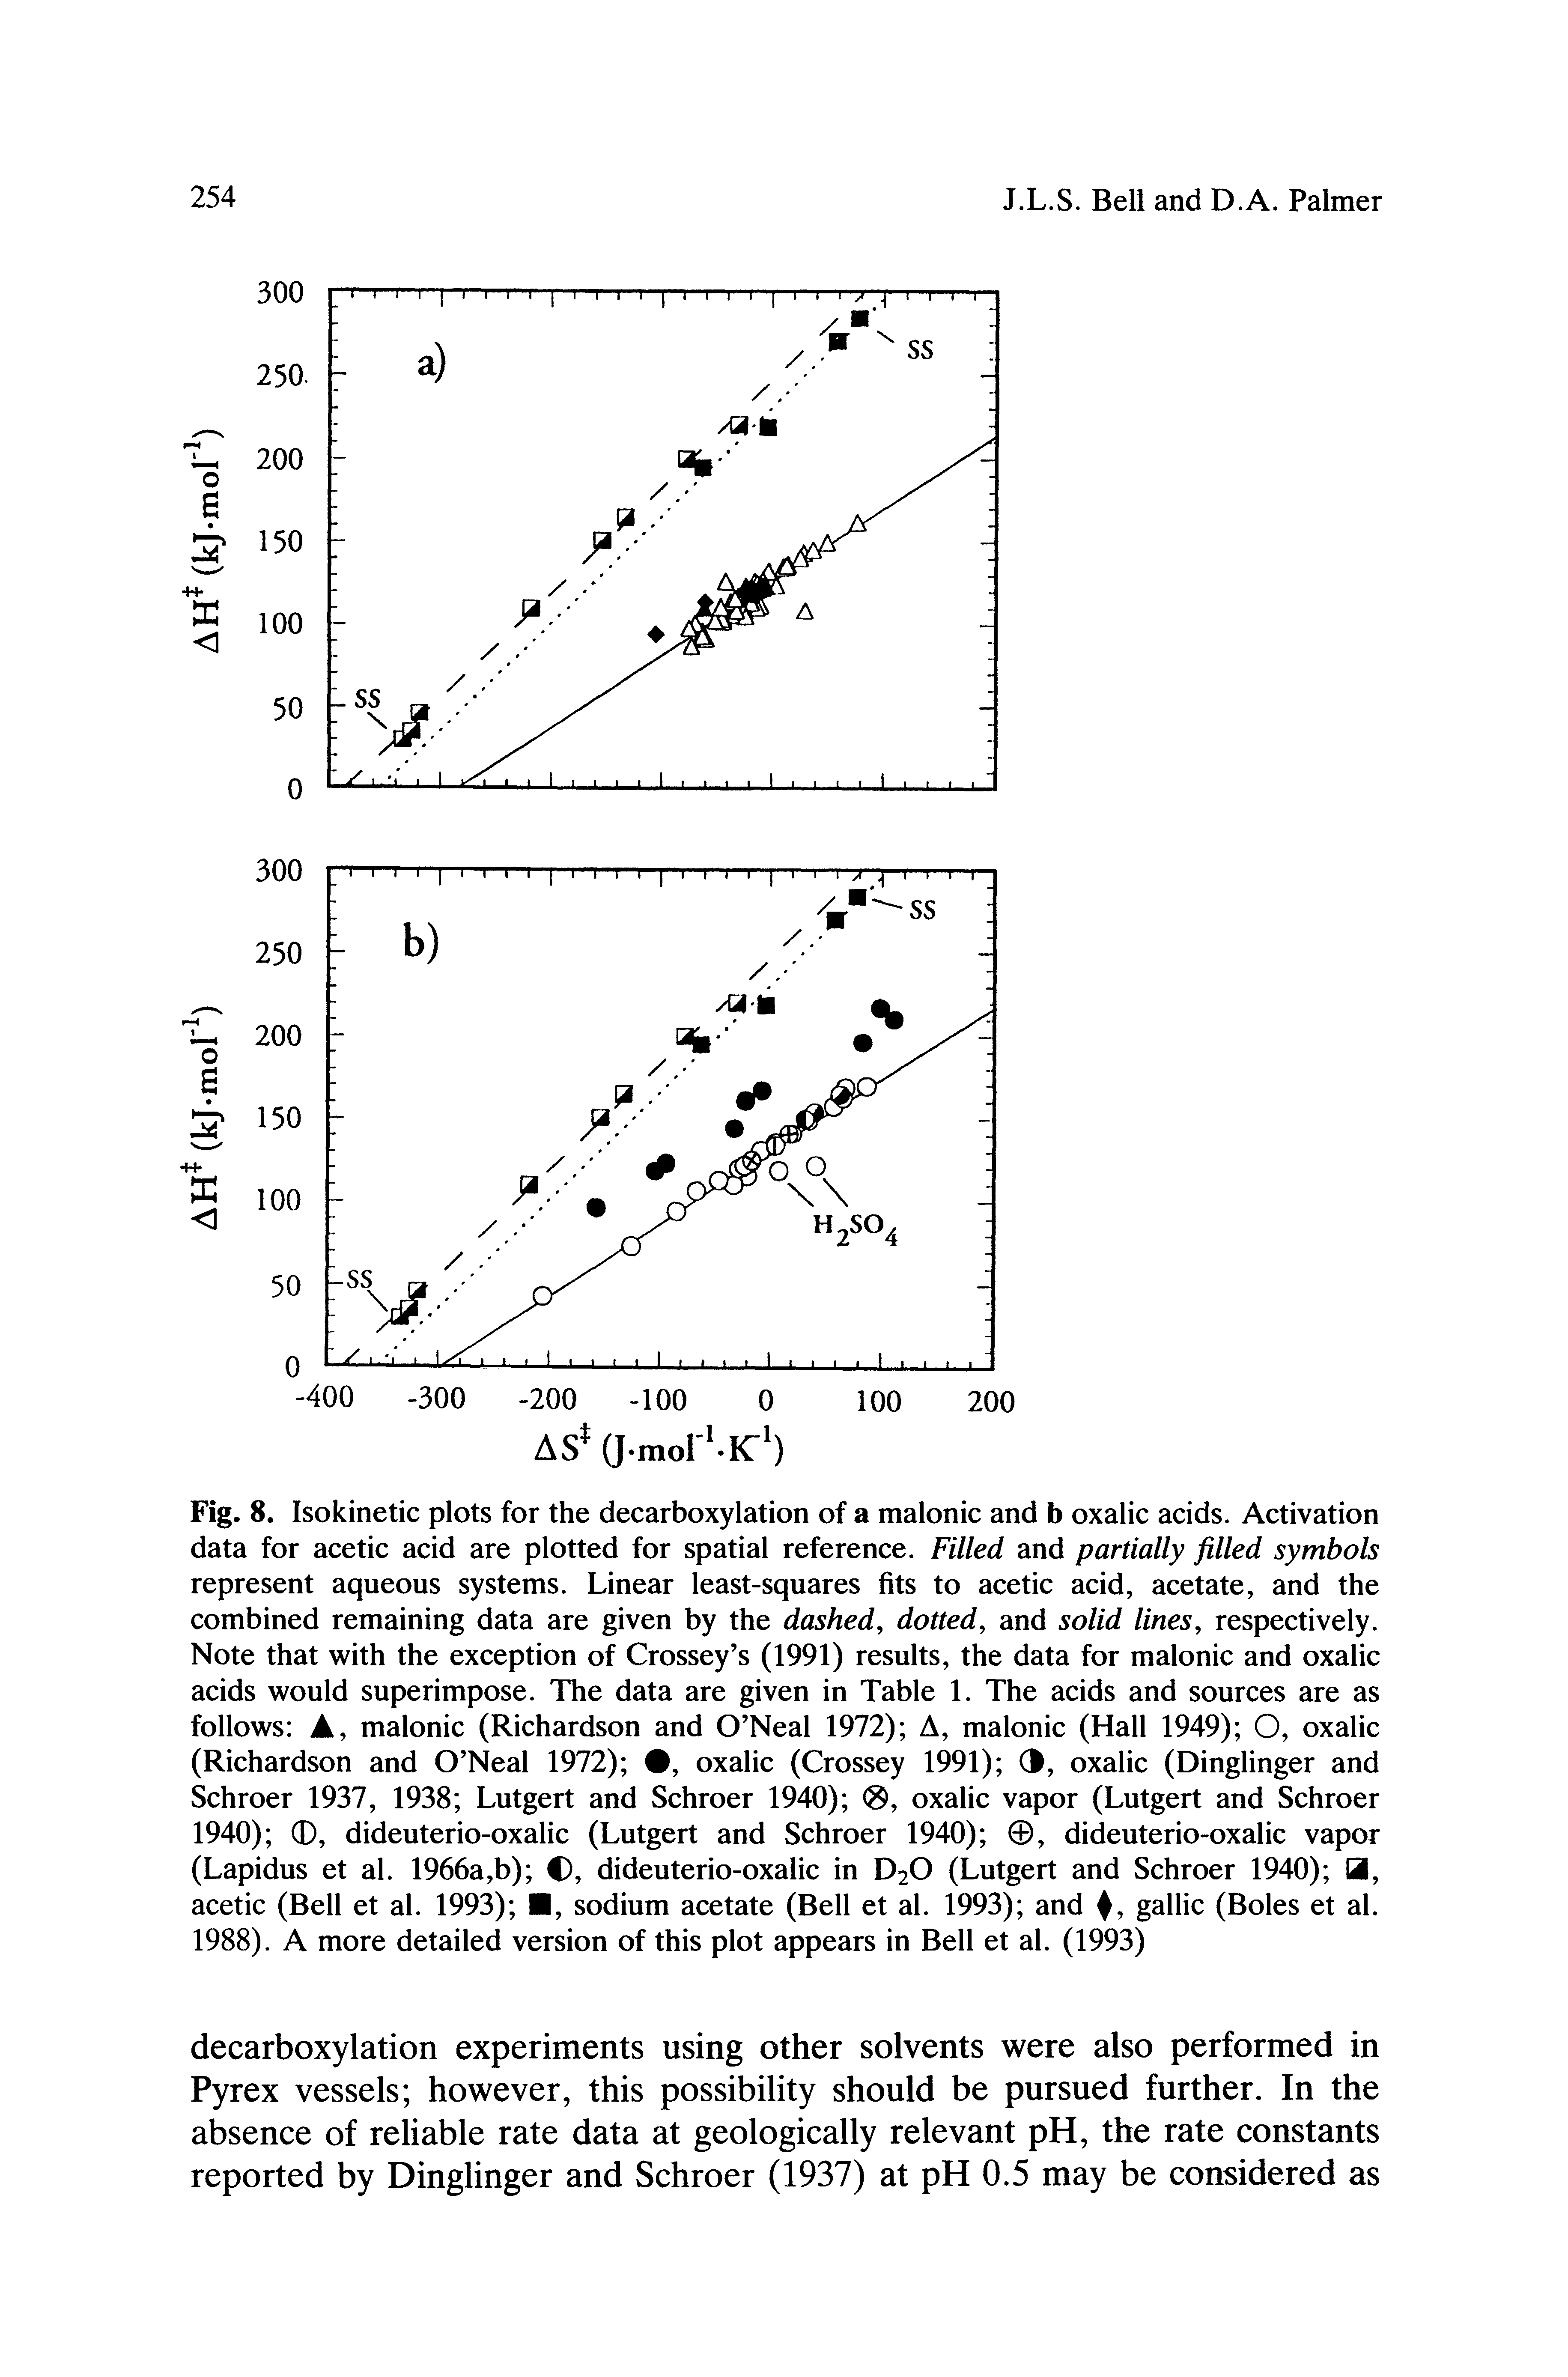 Fig. 8. Isokinetic plots for the decarboxylation of a malonic and b oxalic acids. Activation data for acetic acid are plotted for spatial reference. Filled and partially filled symbols represent aqueous systems. Linear least-squares fits to acetic acid, acetate, and the combined remaining data are given by the dashed, dotted, and solid lines, respectively. Note that with the exception of Crossey s (1991) results, the data for malonic and oxalic acids would superimpose. The data are given in Table 1. The acids and sources are as follows A, malonic (Richardson and O Neal 1972) A, malonic (Hall 1949) O, oxalic (Richardson and O Neal 1972) , oxalic (Crossey 1991) O, oxalic (Dinglinger and Schroer 1937, 1938 Lutgert and Schroer 1940) oxalic vapor (Lutgert and Schroer 1940) 0, dideuterio-oxalic (Lutgert and Schroer 1940) 0, dideuterio-oxalic vapor (Lapidus et al. 1966a,b) C, dideuterio-oxalic in D2O (Lutgert and Schroer 1940) B, acetic (Bell et al. 1993) , sodium acetate (Bell et al. 1993) and gallic (Boles et al. 1988). A more detailed version of this plot appears in Bell et al. (1993)...